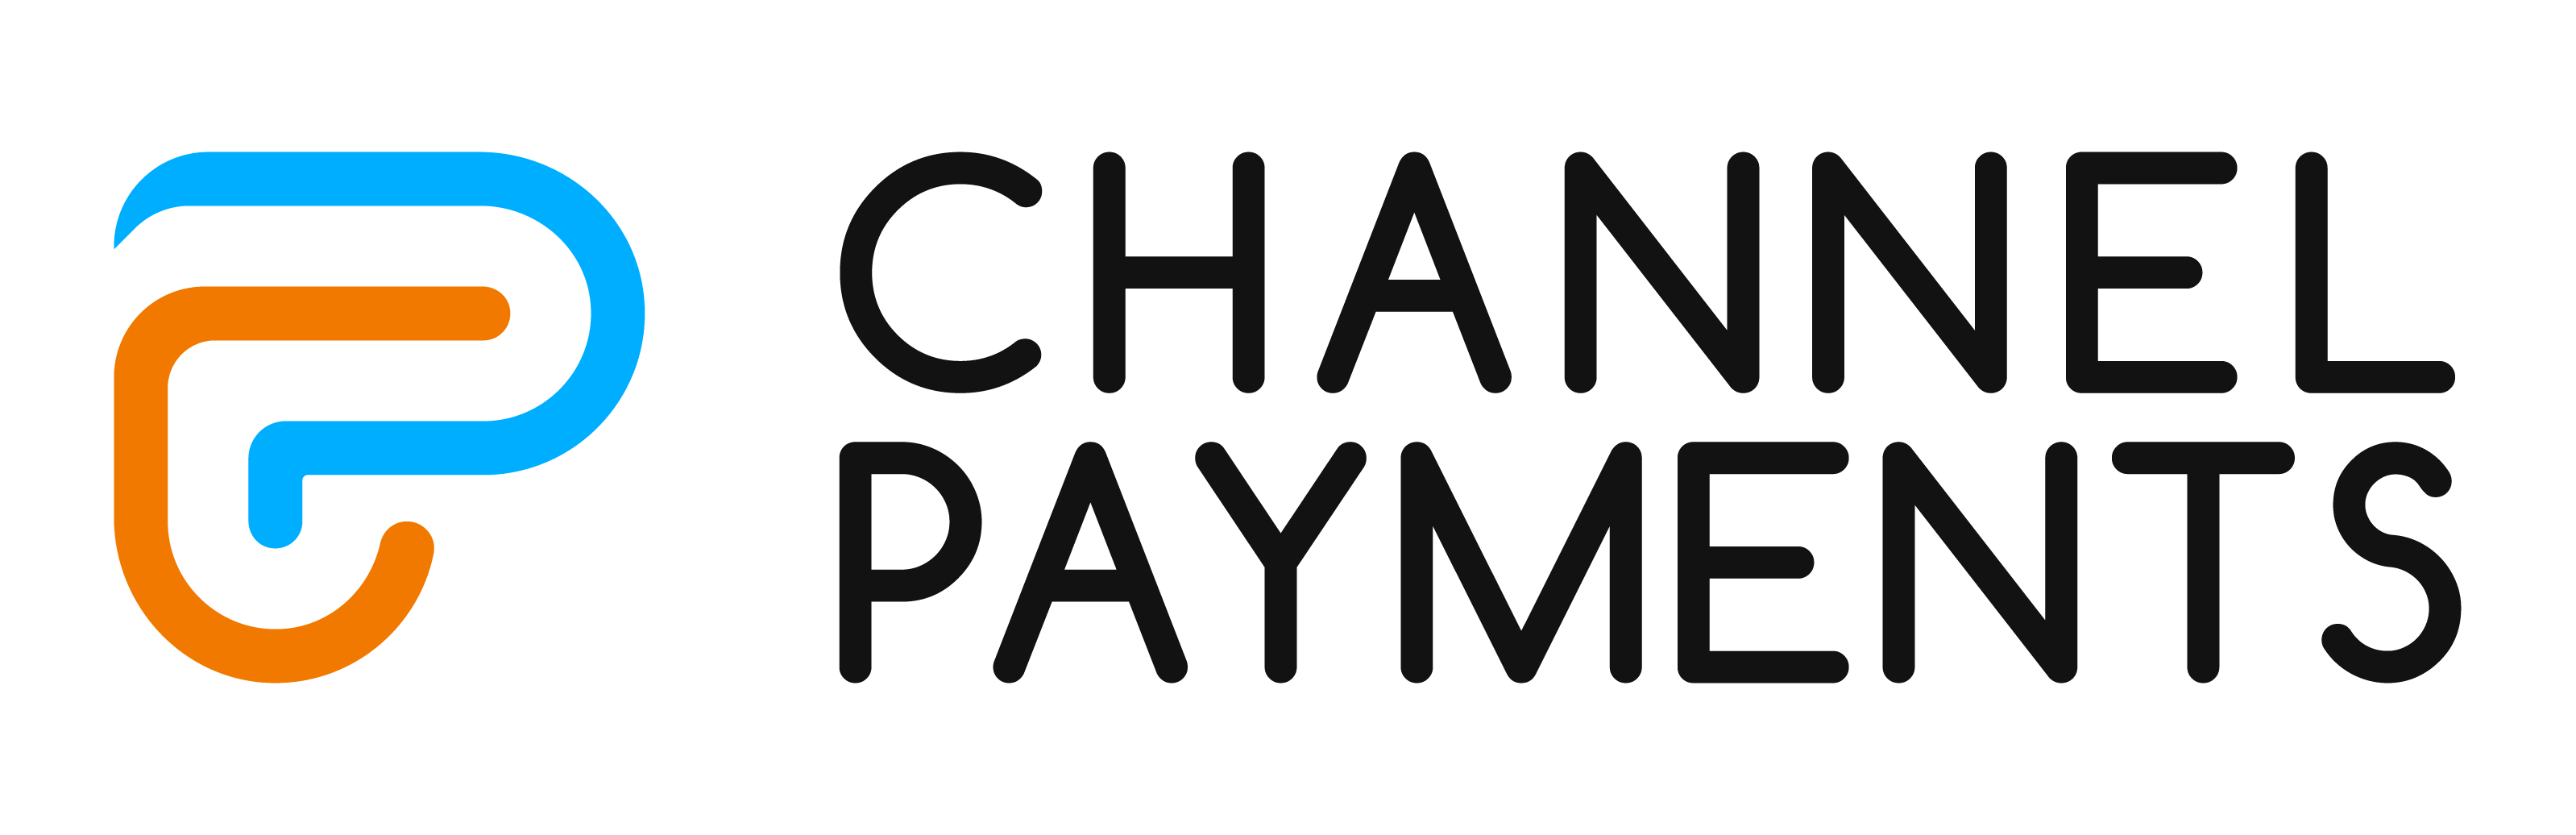 Channel Payments